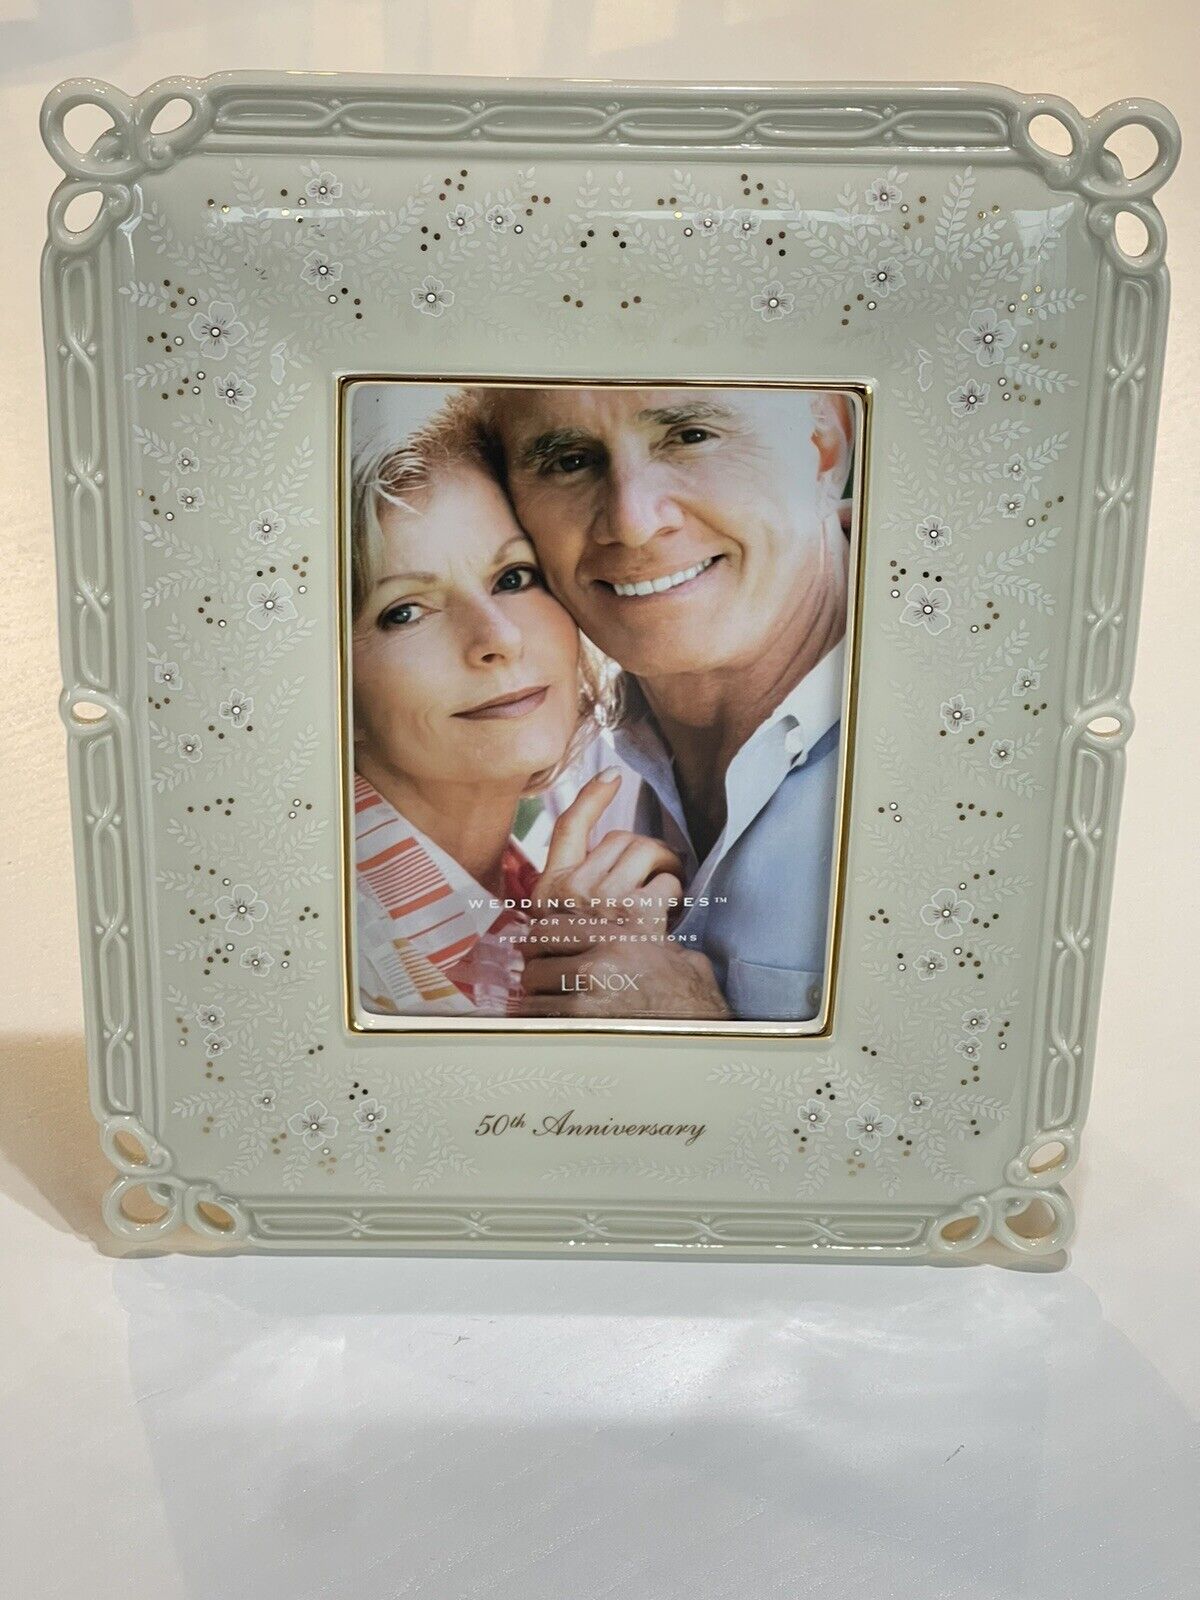 Lenox 50th Anniversary Picture Frame 5x7 Porcelain Wedding Promises Collection